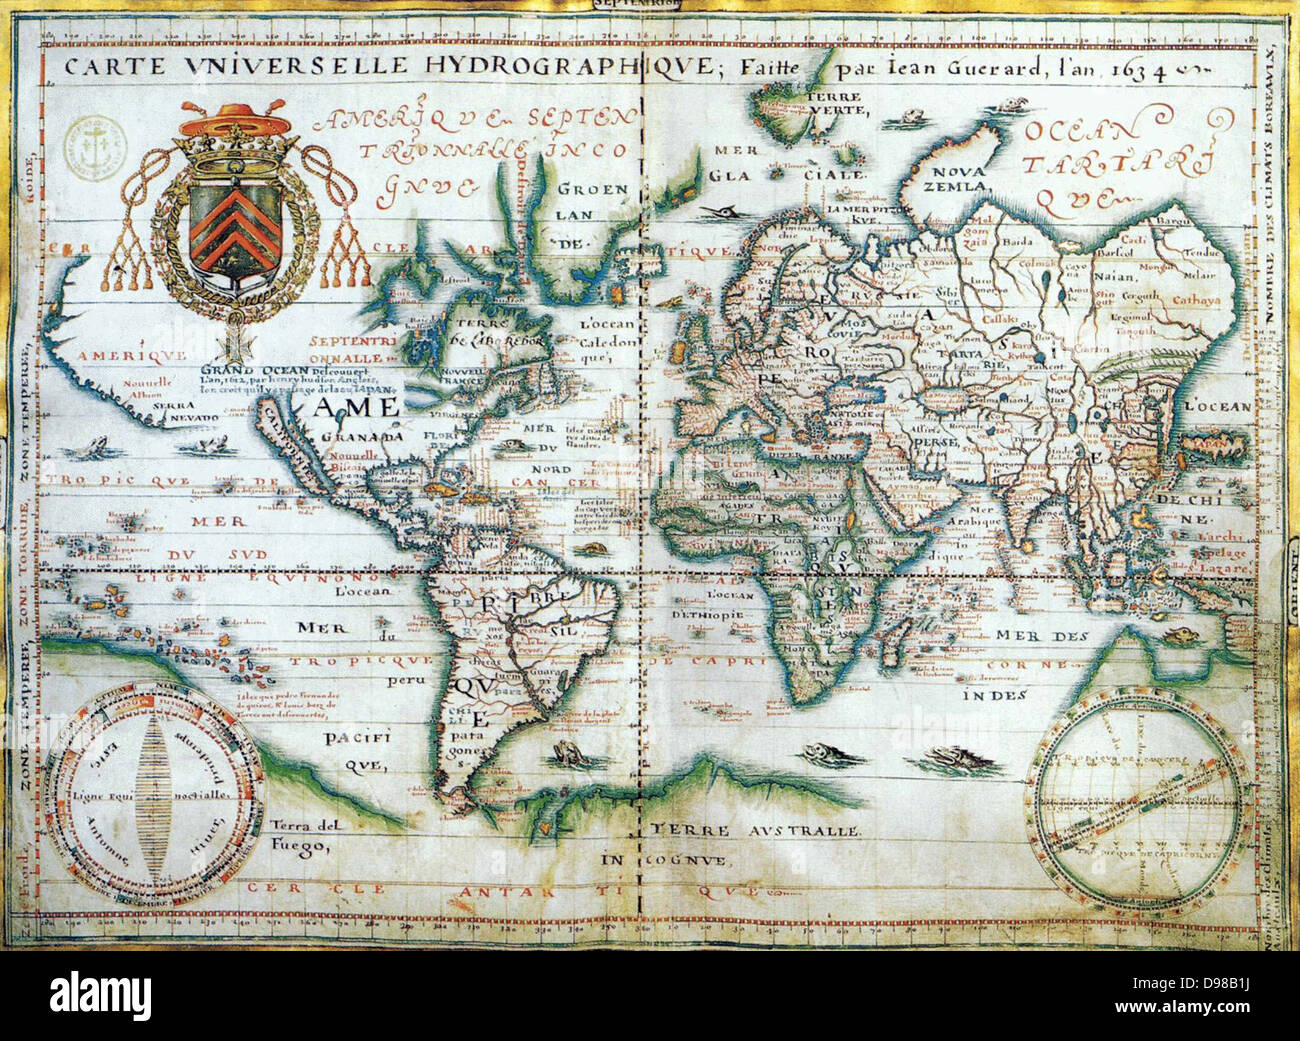 Nautical world map of 1634 by Jean Guerard. Australia is suggested but still unknown territory and , California is shown as an island. Stock Photo